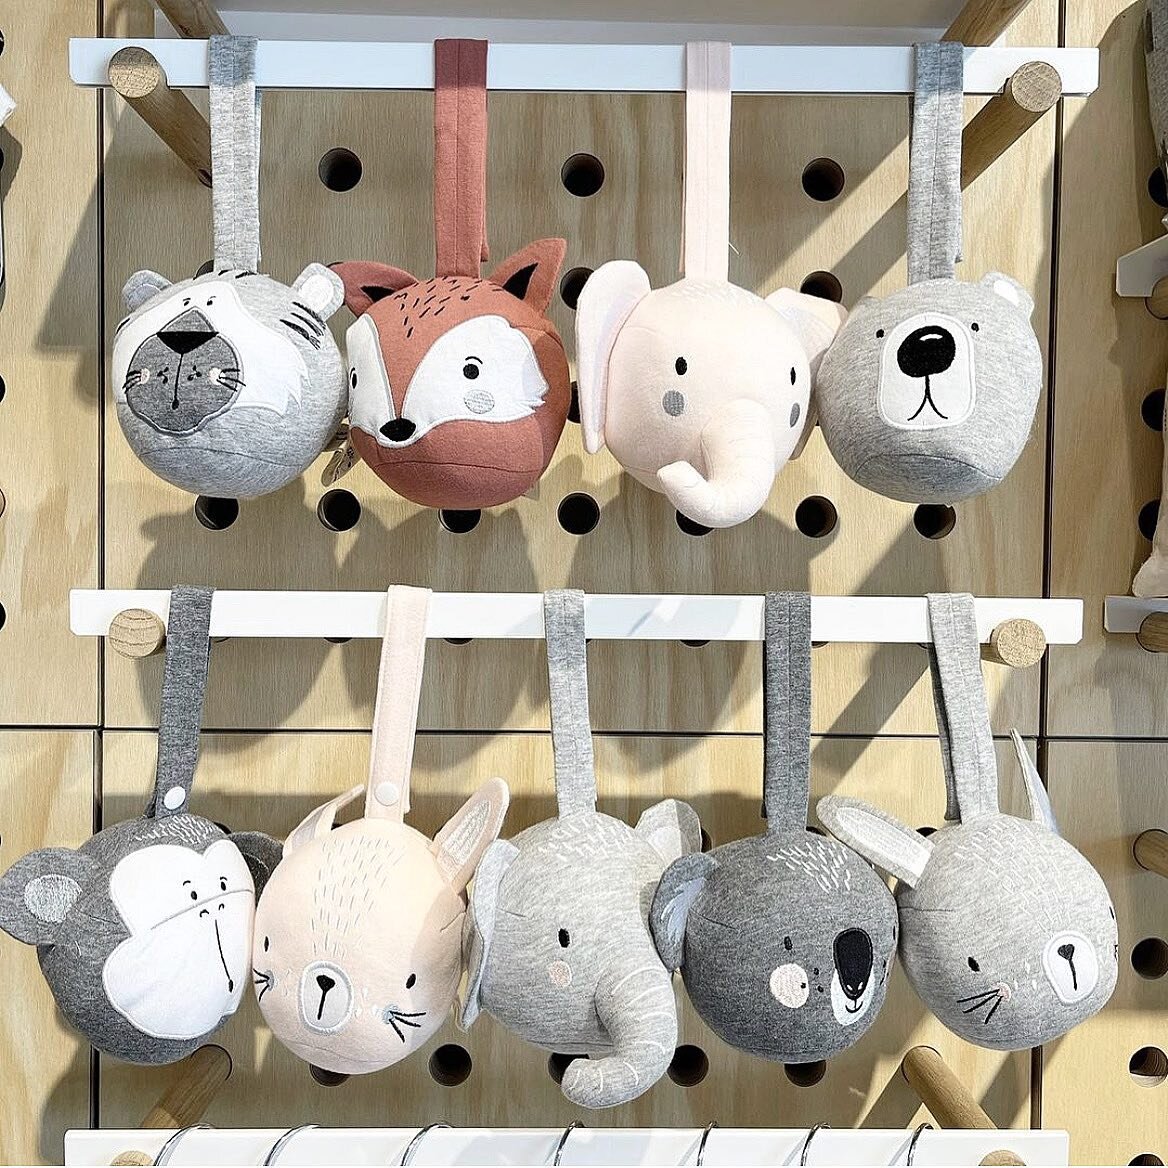 ❤️| Gangs all here! Beautiful display of our favourite rattle balls at our gorgeous stockist @augieandmay #welove 
.
.
.
.
#love #pramtoy #rattleball #coolkids #babygift #babyshowergift #misterflykids